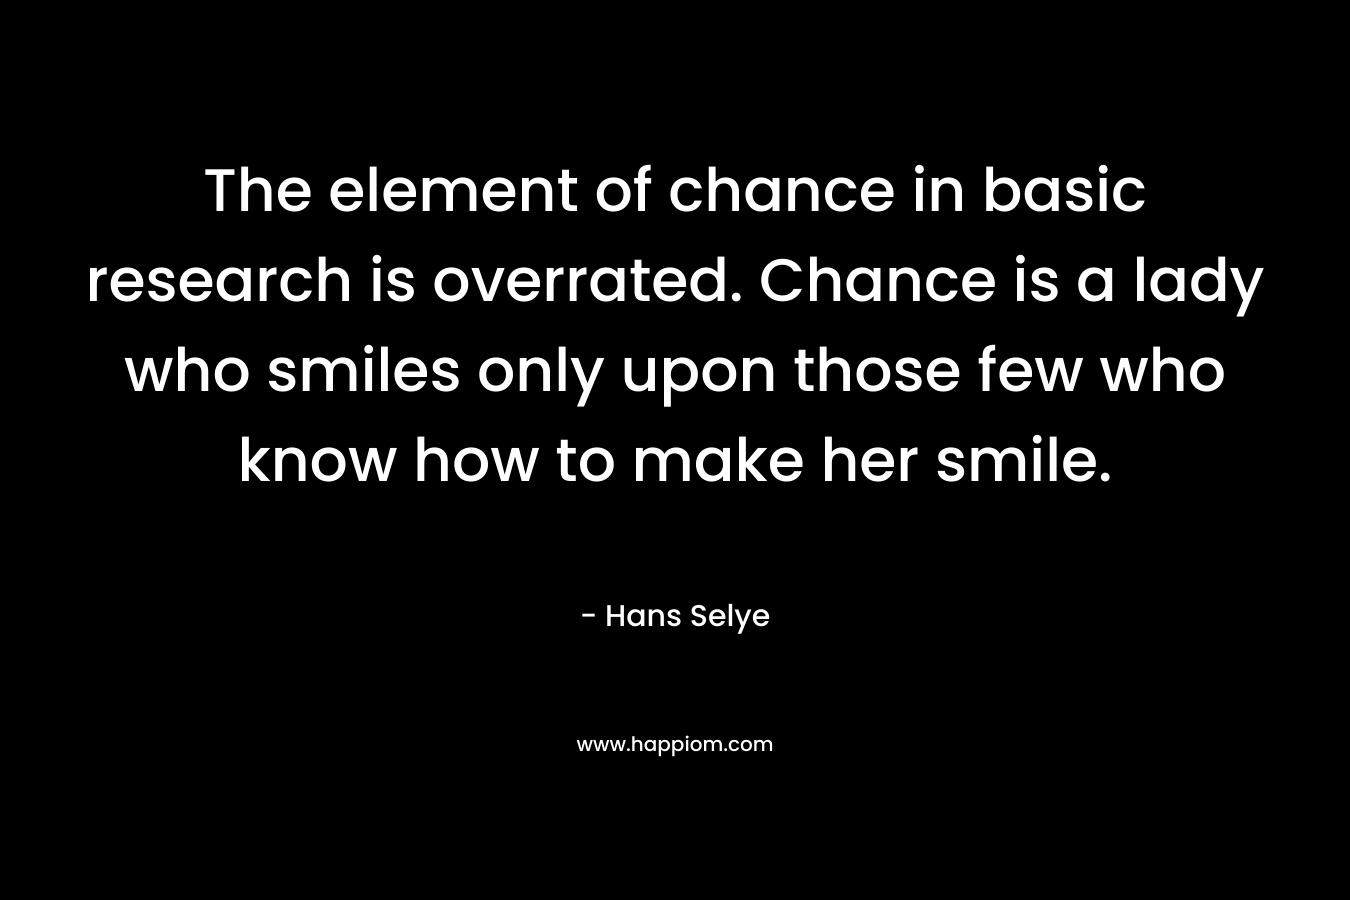 The element of chance in basic research is overrated. Chance is a lady who smiles only upon those few who know how to make her smile.